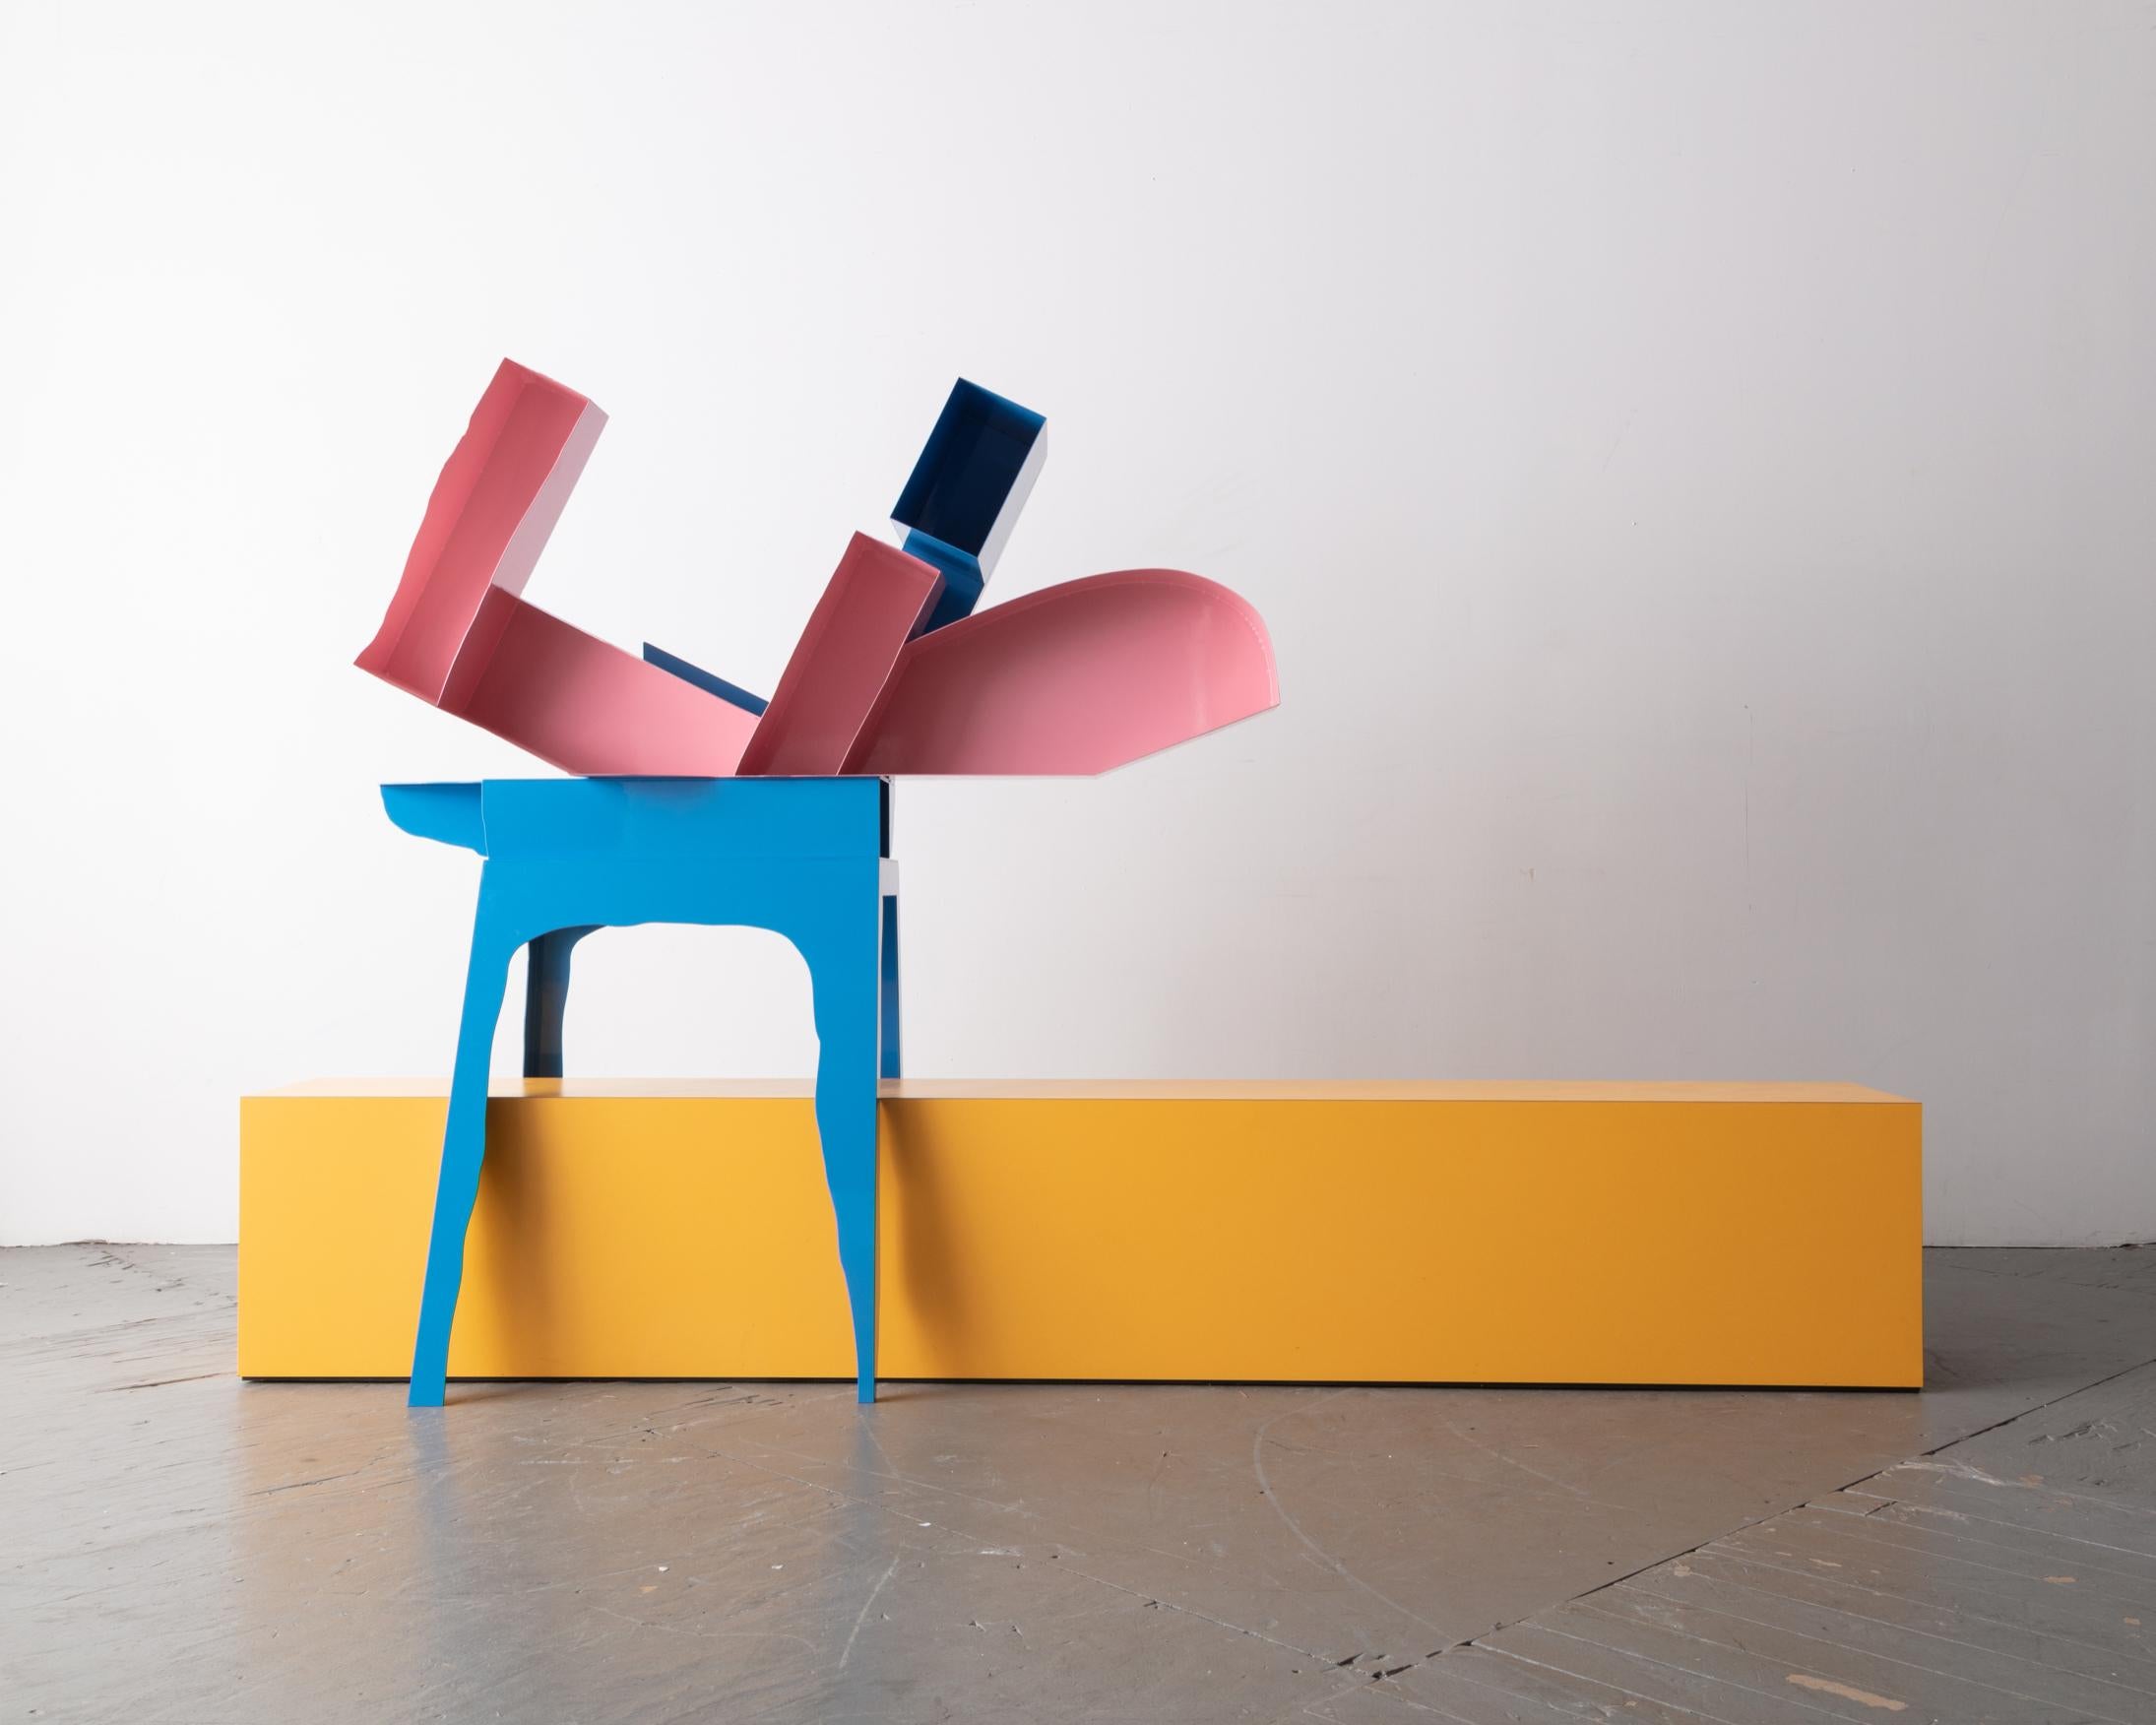 'Kipsy II'. Designed and made by Serban Ionescu, USA, 2019. Powder coated steel, wood and laminate.